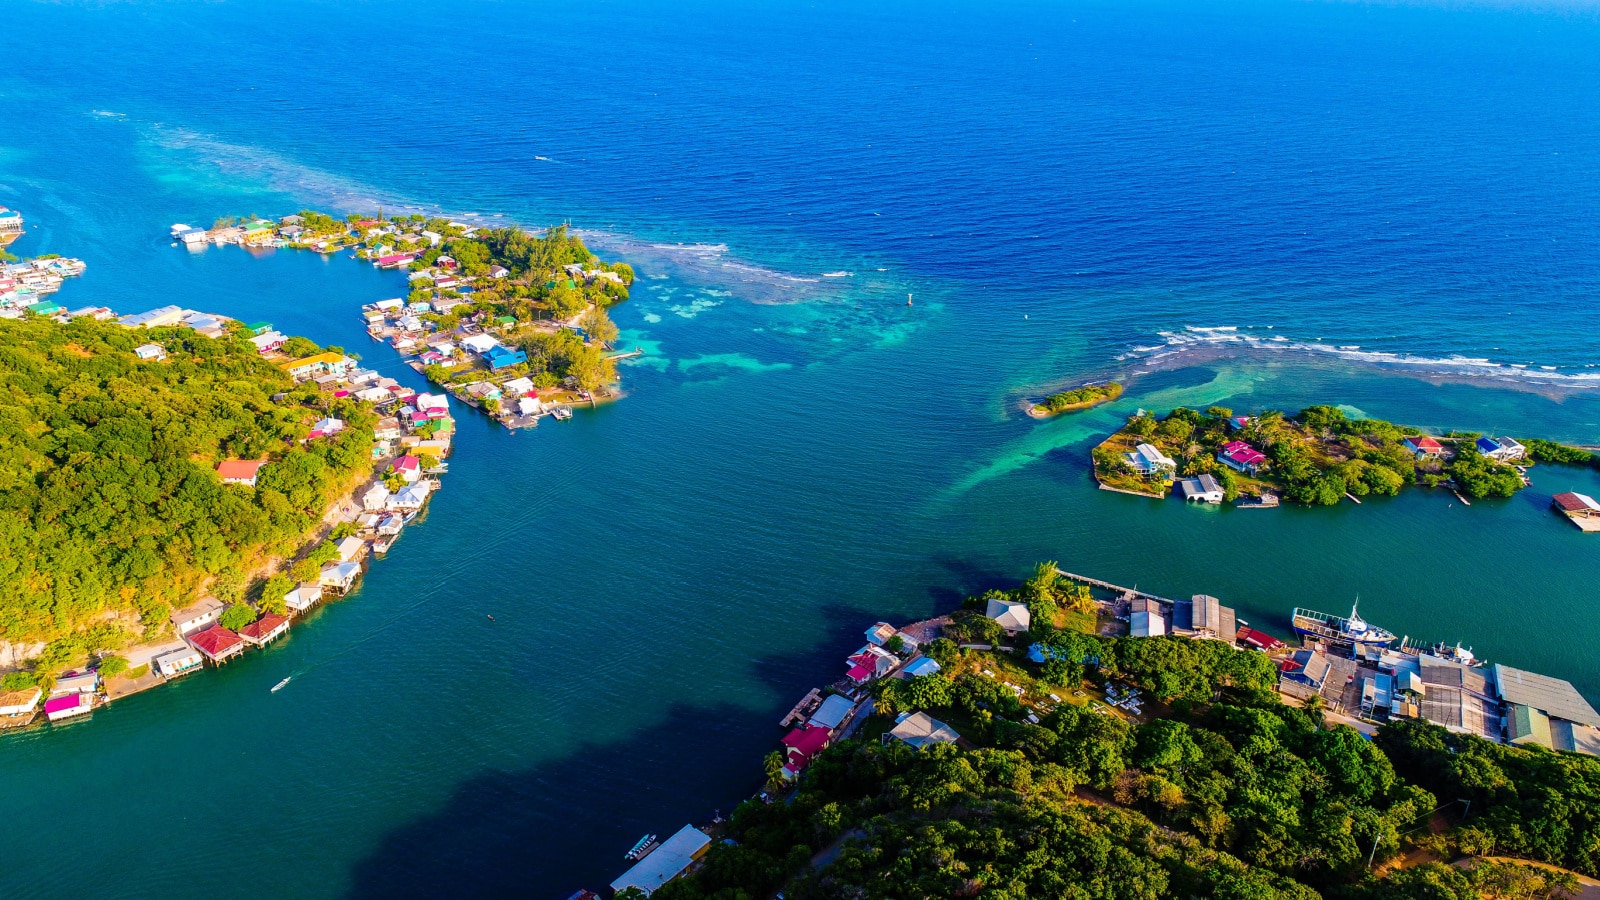 Colorful cabins located at Port Royal, eastern side of Roatan, Bay Islands of Honduras.